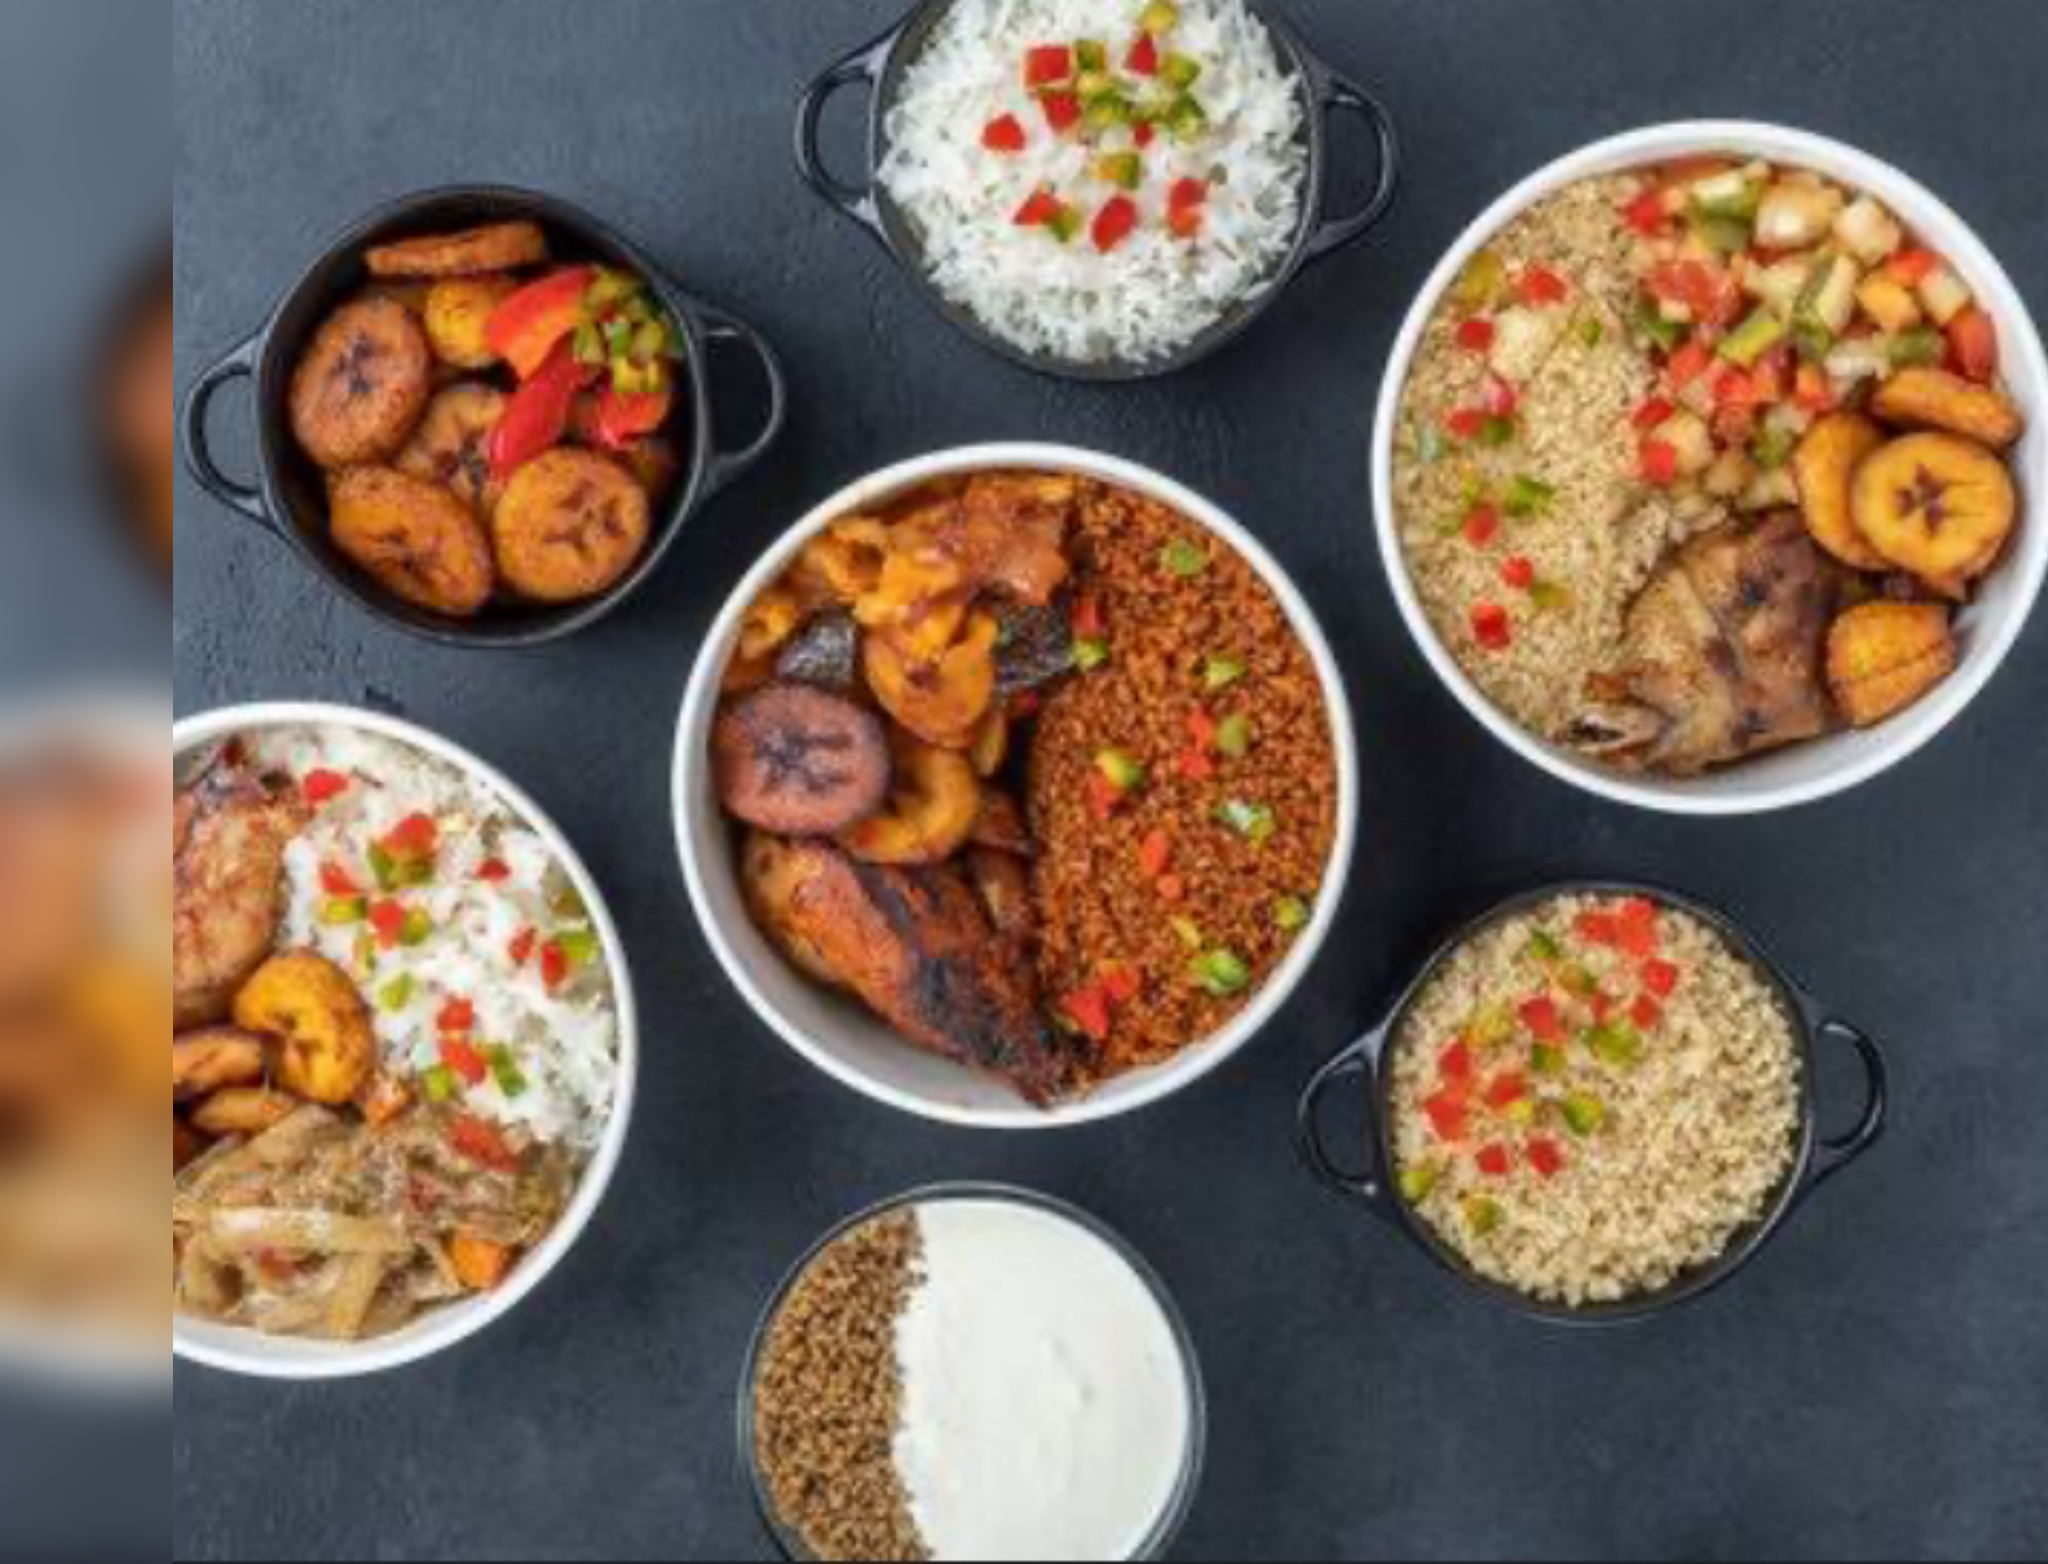 Top 10 African Countries with the Nicest Food: Best African Countries with Nice Recipes